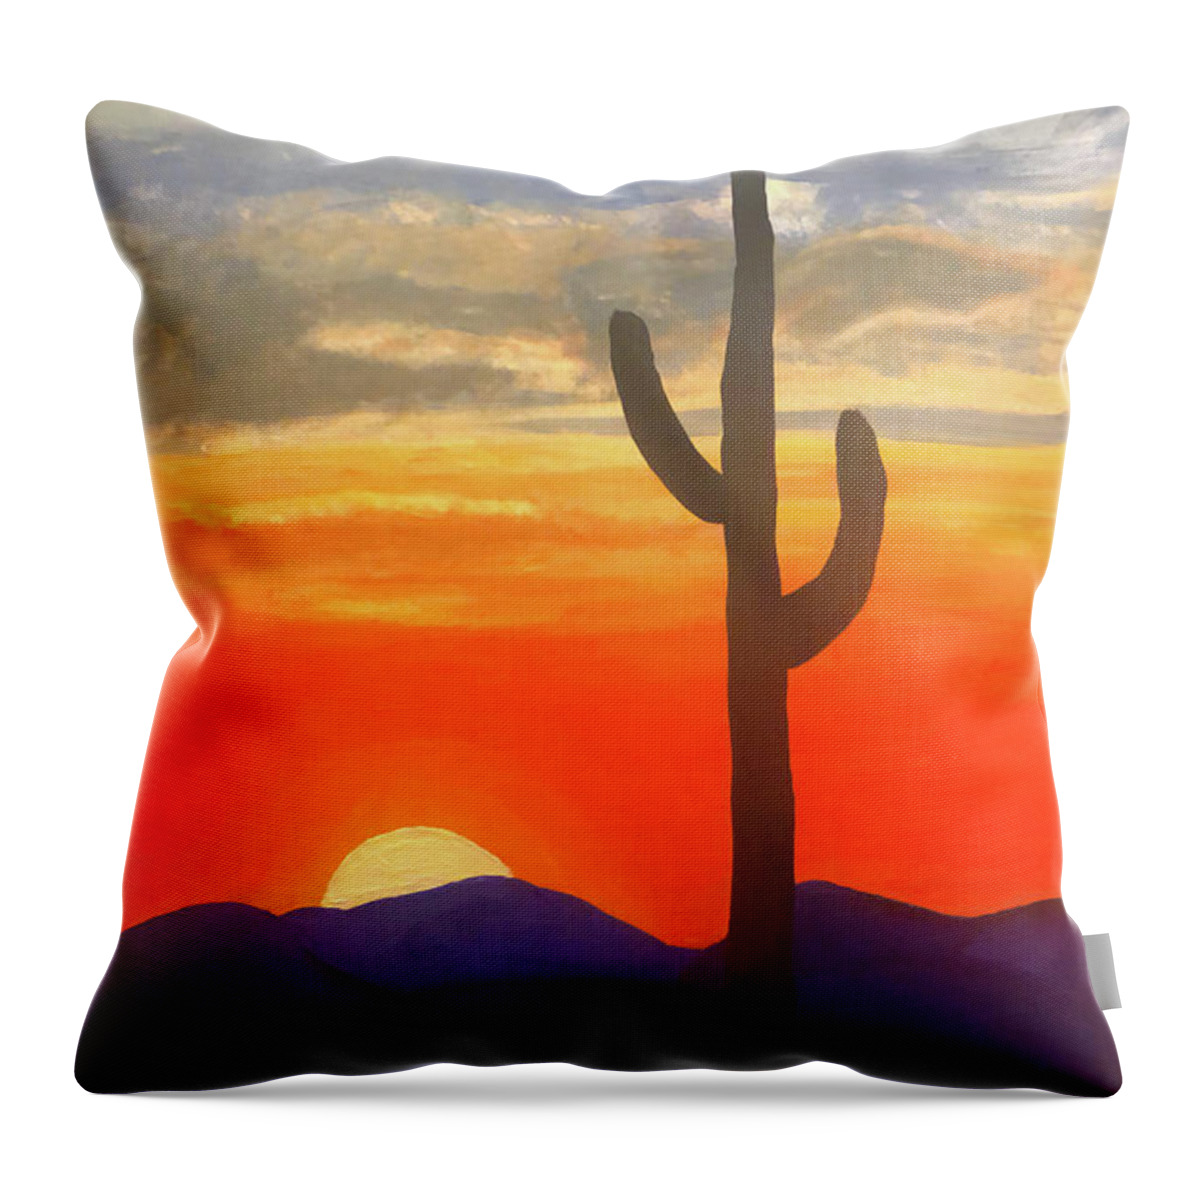 New Mexico Throw Pillow featuring the painting New Mexico Sunset by Christina Wedberg